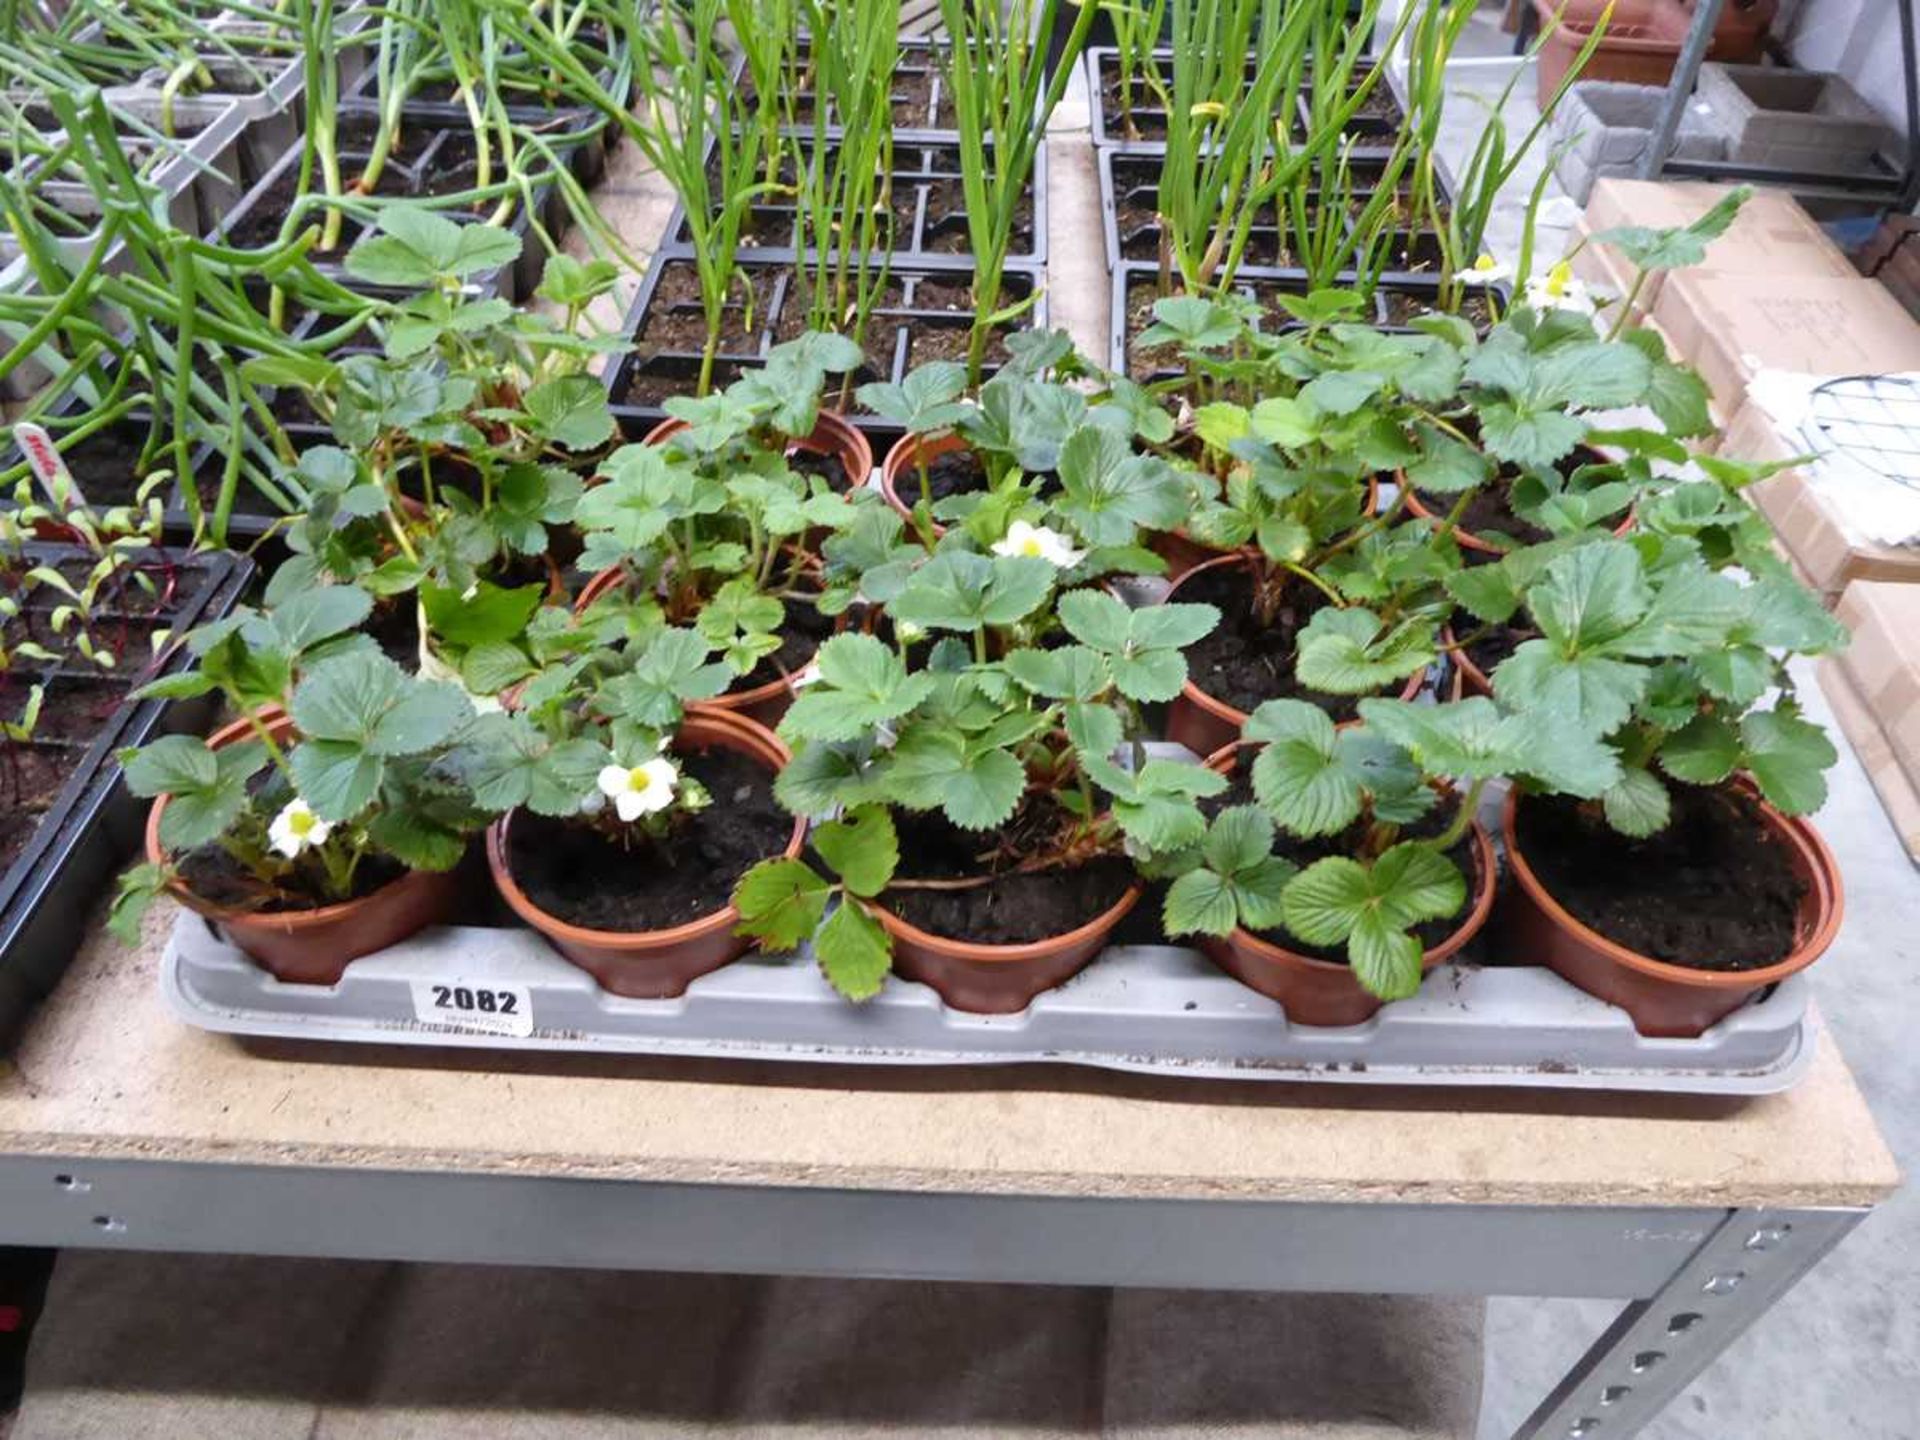 Tray containing 15 strawberry plants